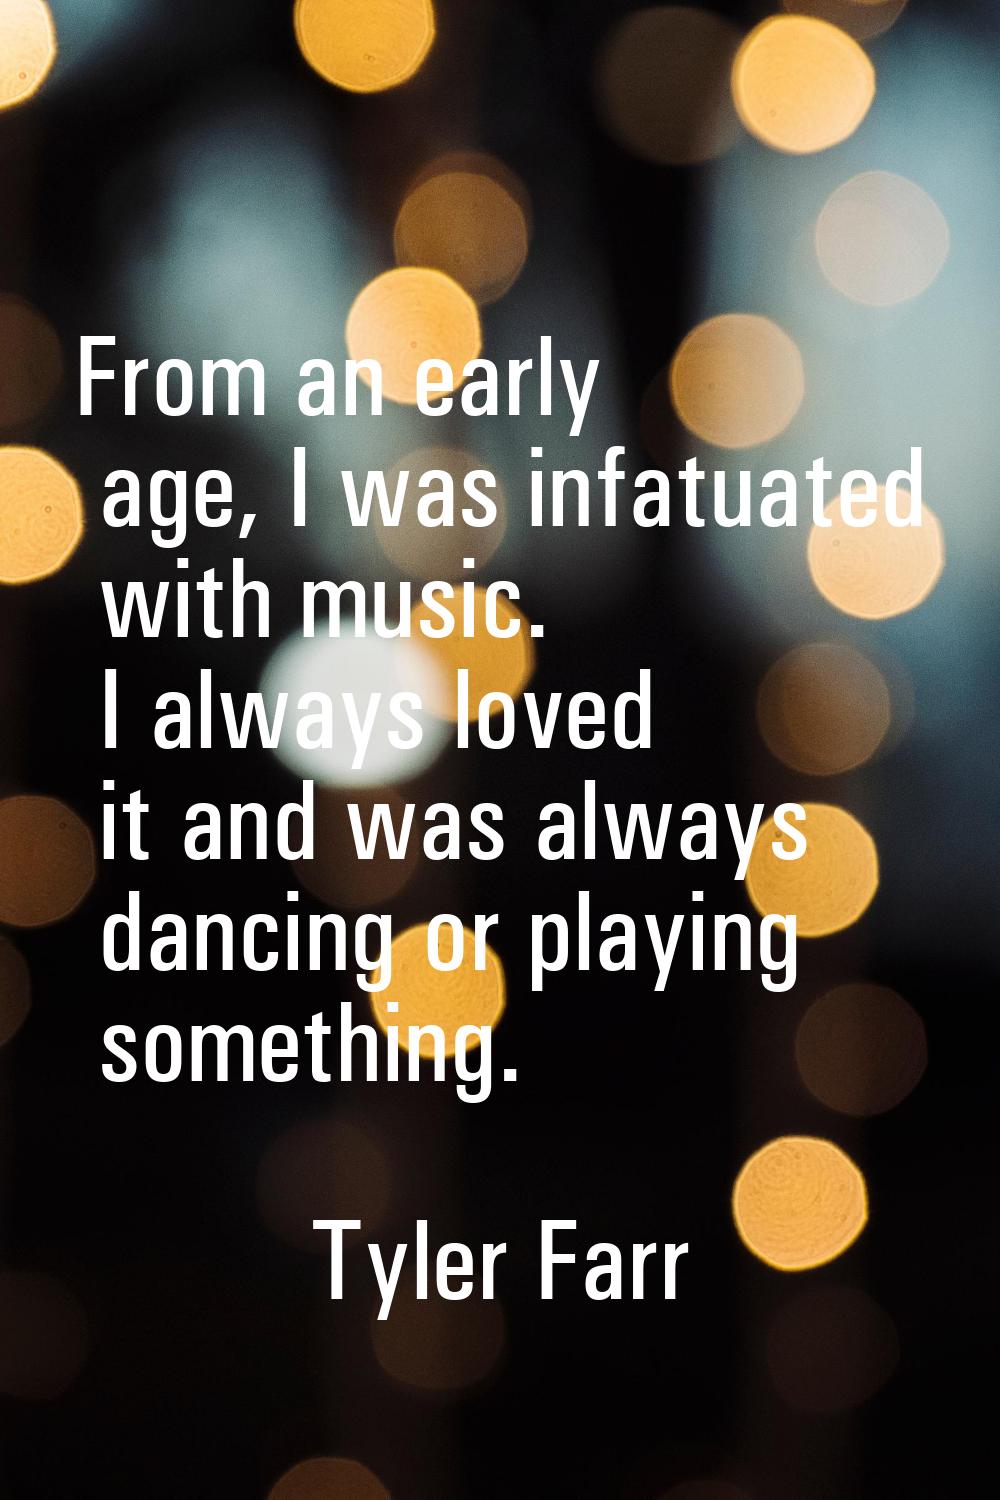 From an early age, I was infatuated with music. I always loved it and was always dancing or playing